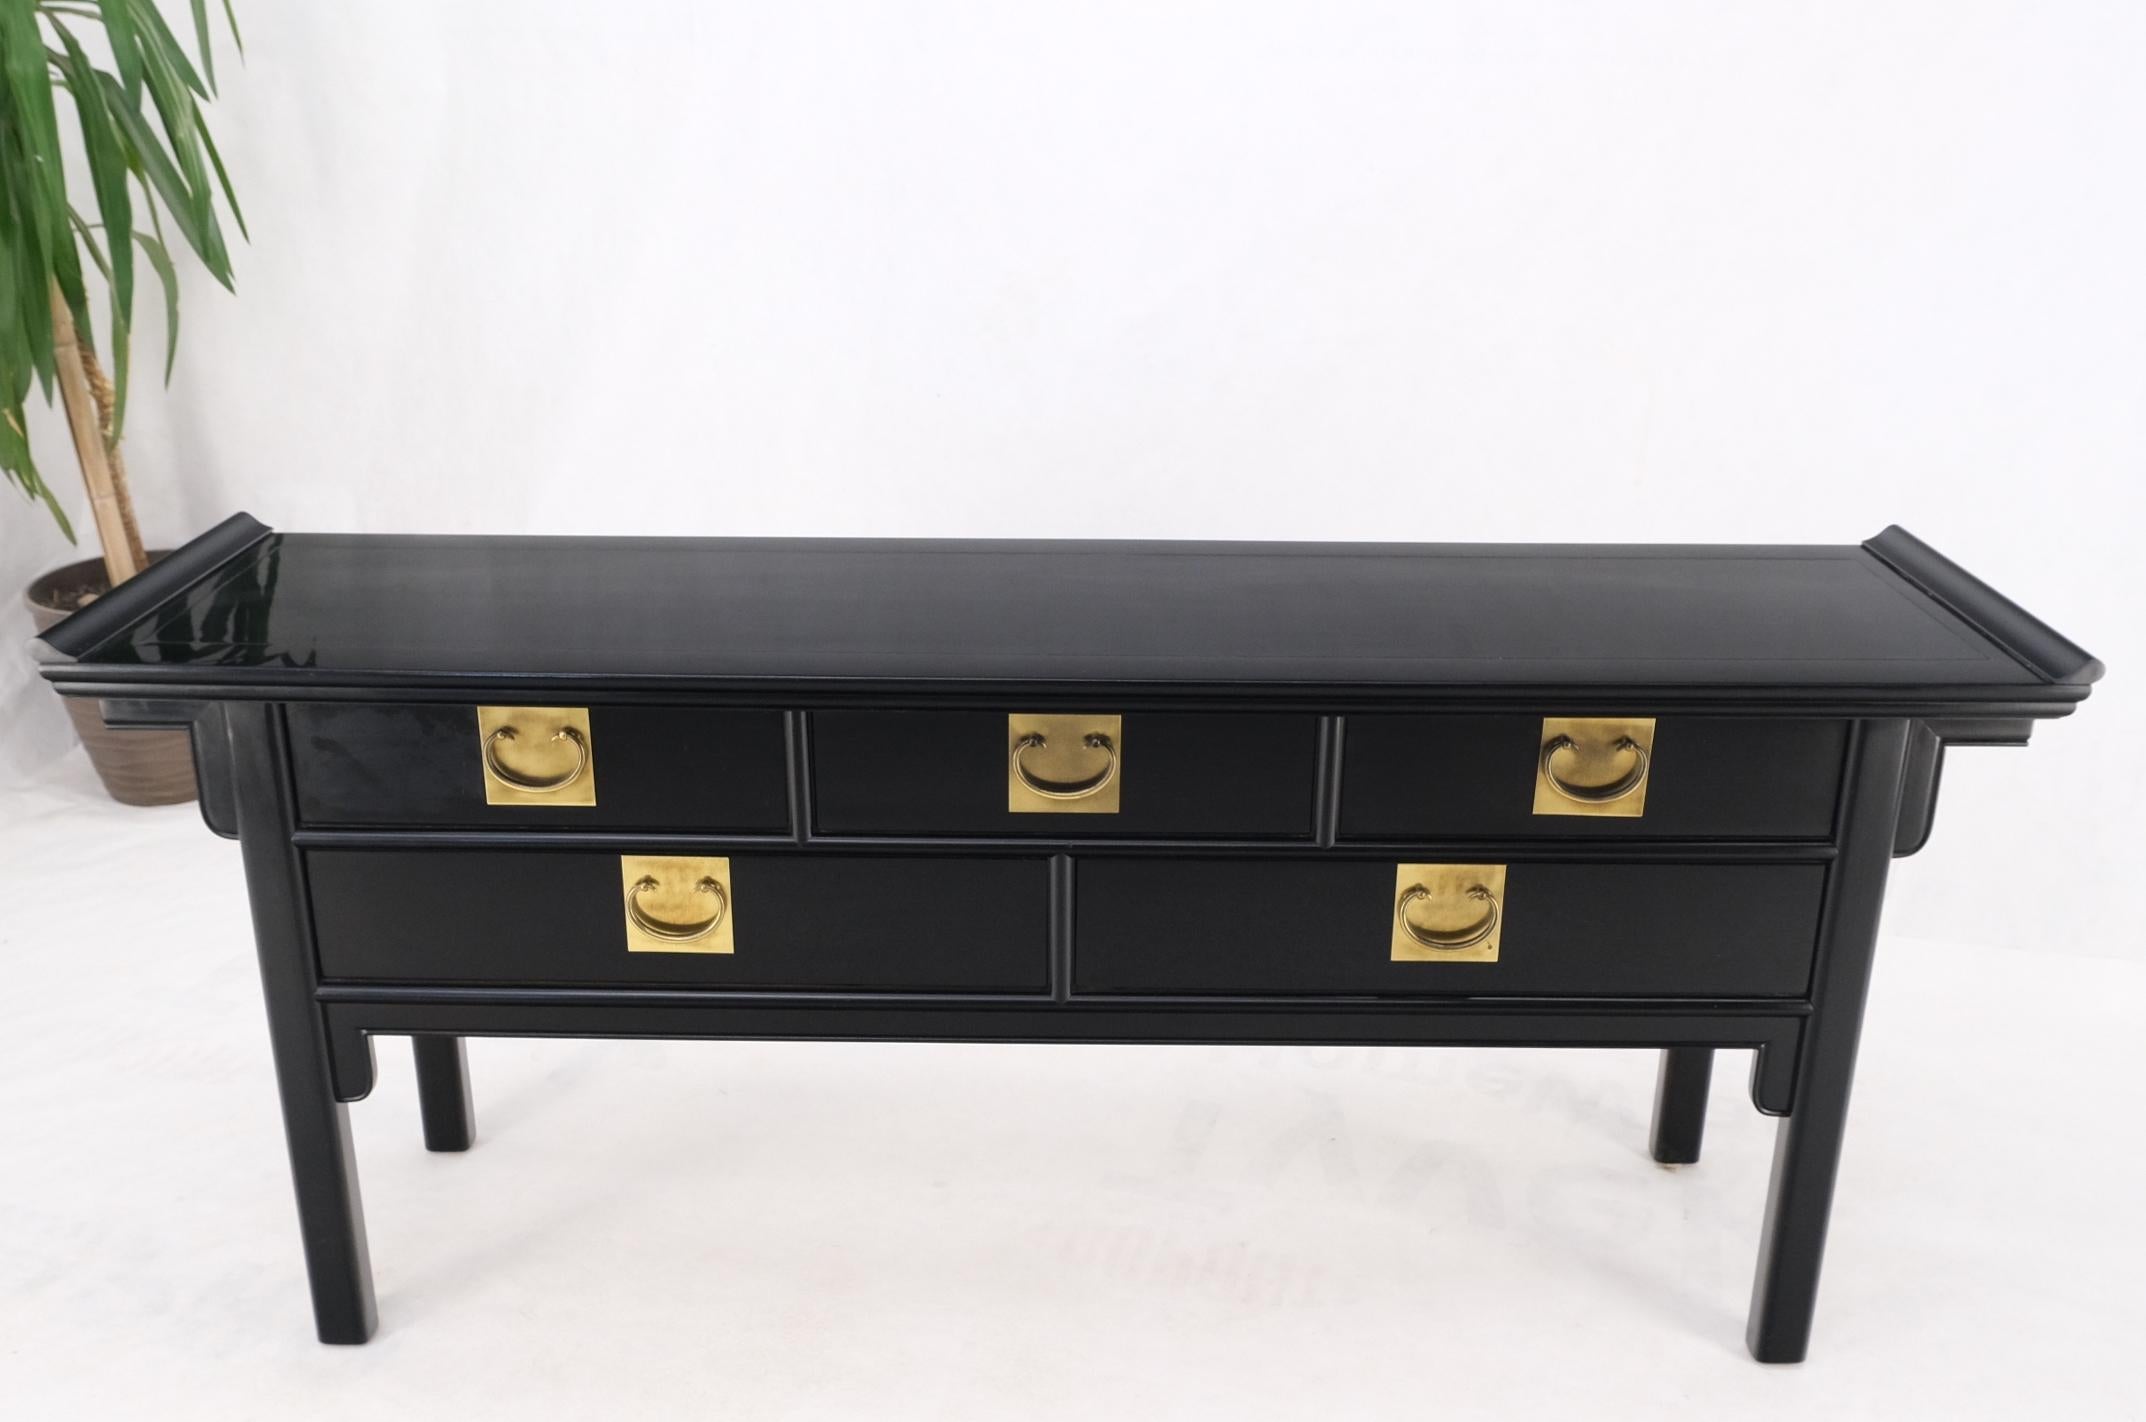 Black Lacquer Brass Hardware 5 Drawers Oriental Long Credenza Console Table Mint 8